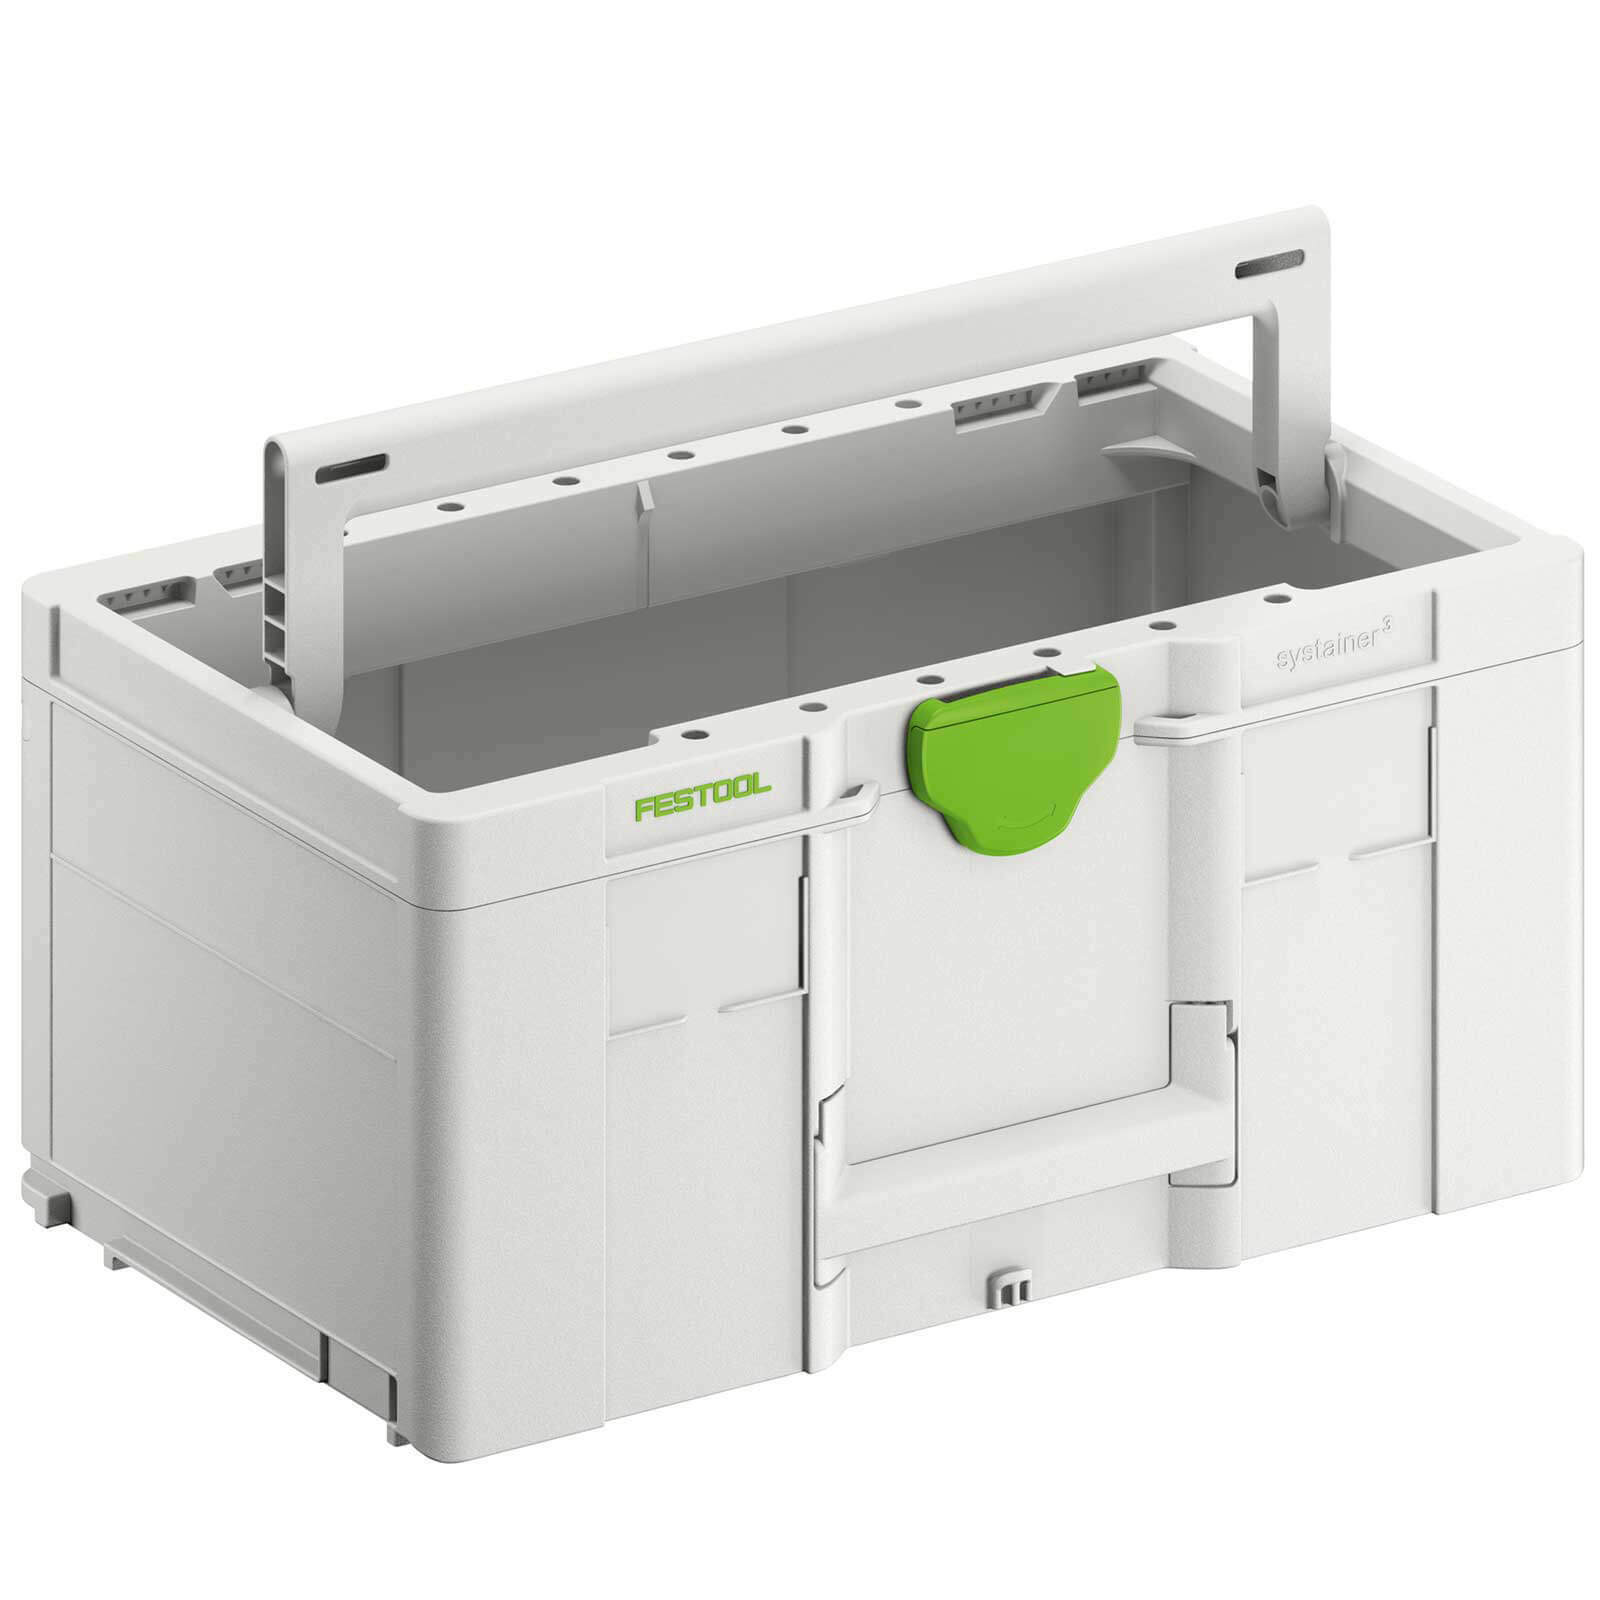 Festool Systainer 3 ToolBox SYS3 TB Large Tool Case 508mm 296mm 237mm